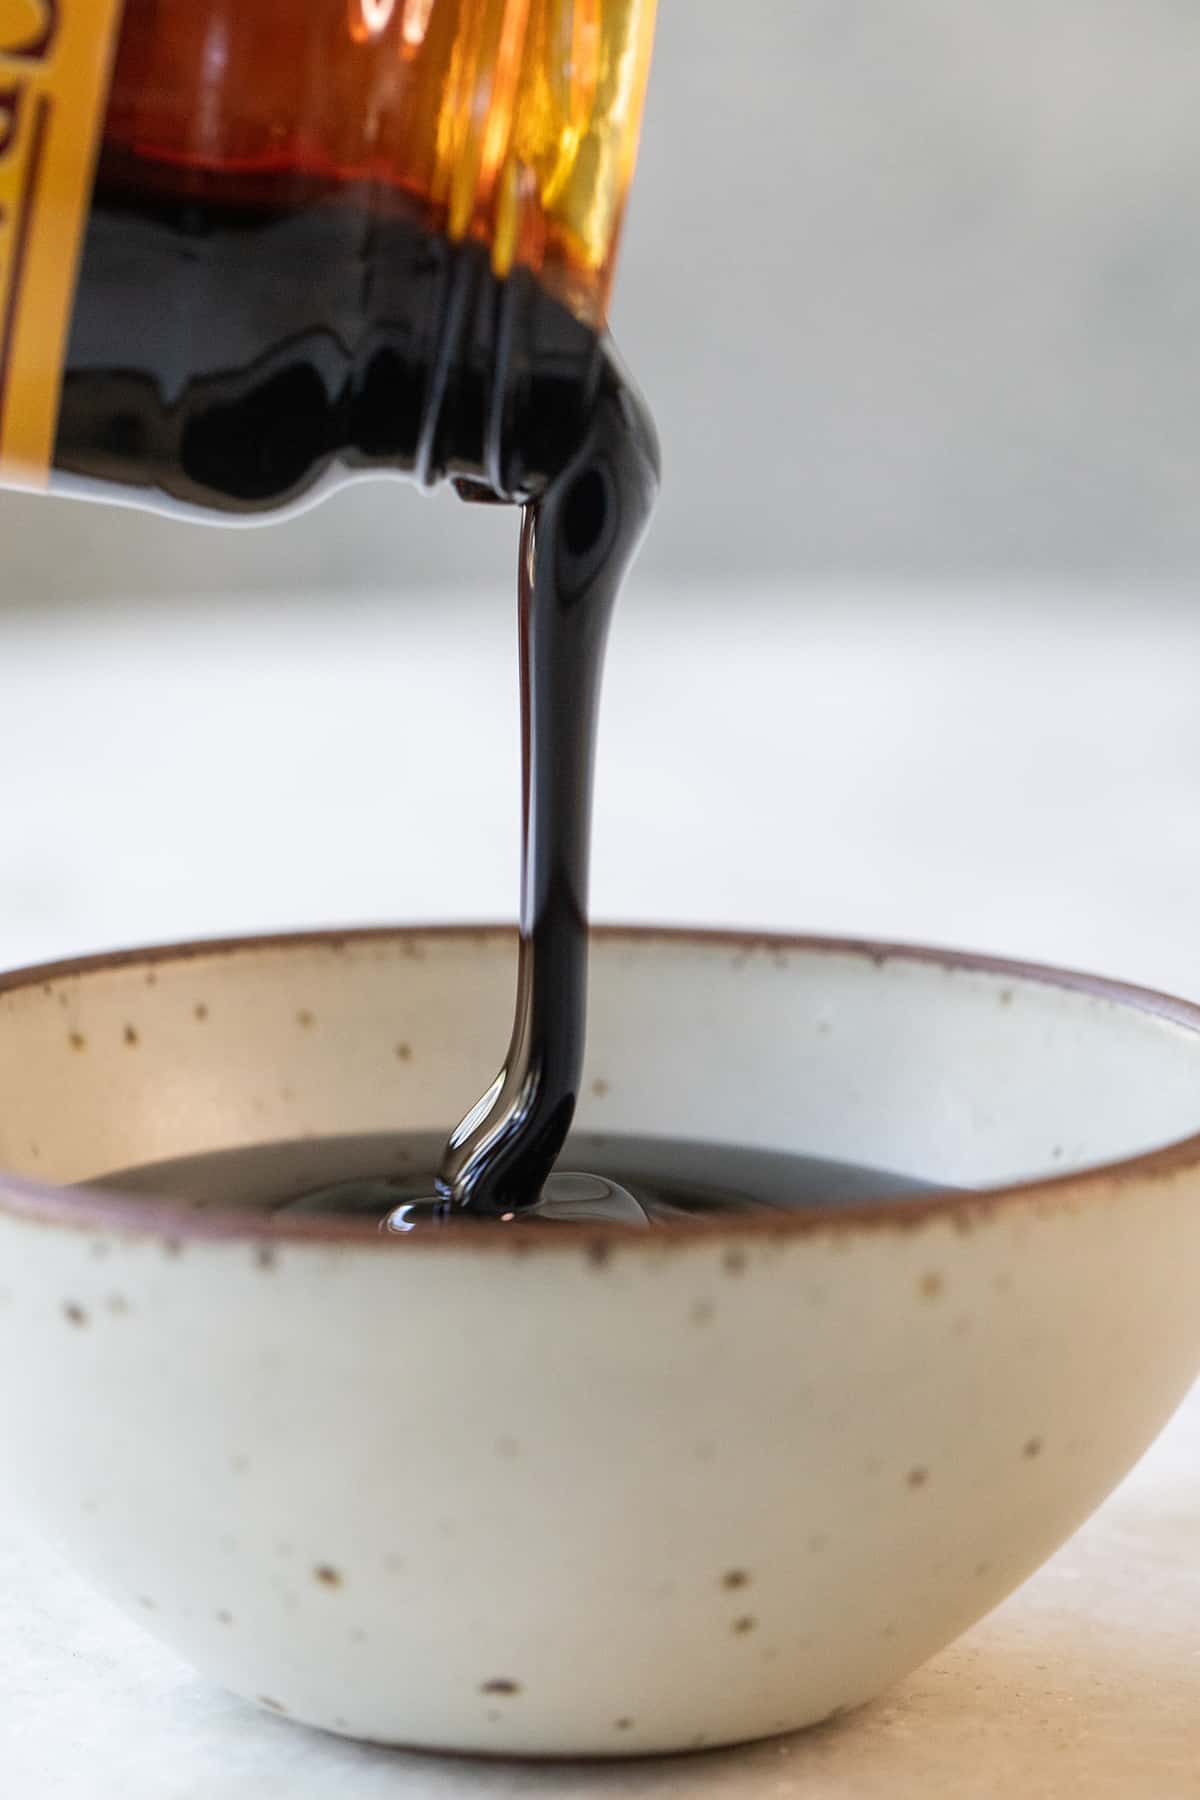 molasses being poured into a bowl